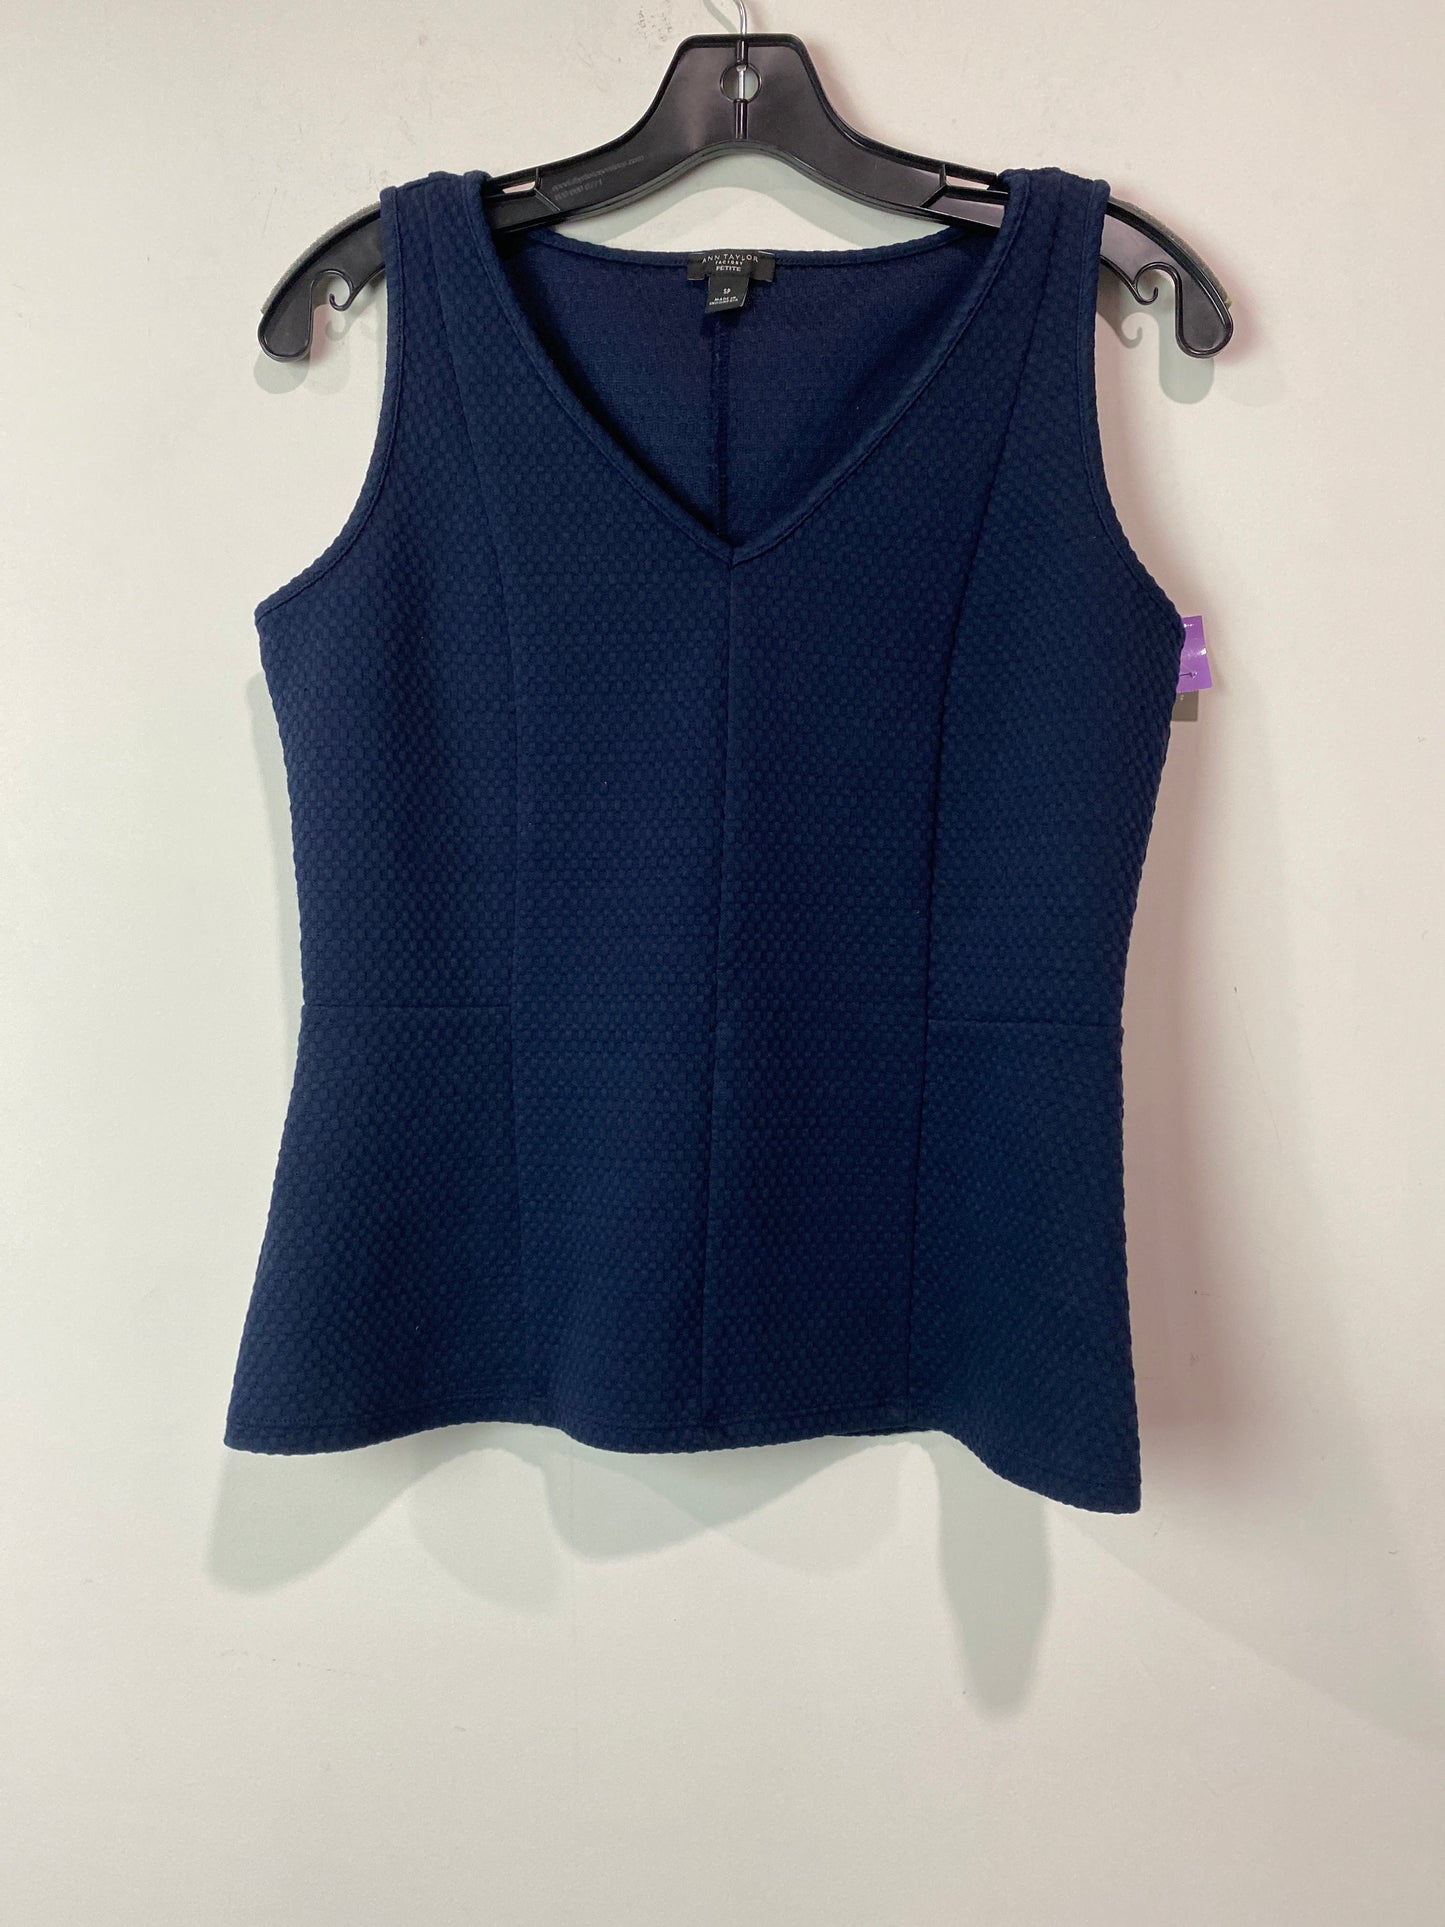 Top Sleeveless By Ann Taylor  Size: Petite   S